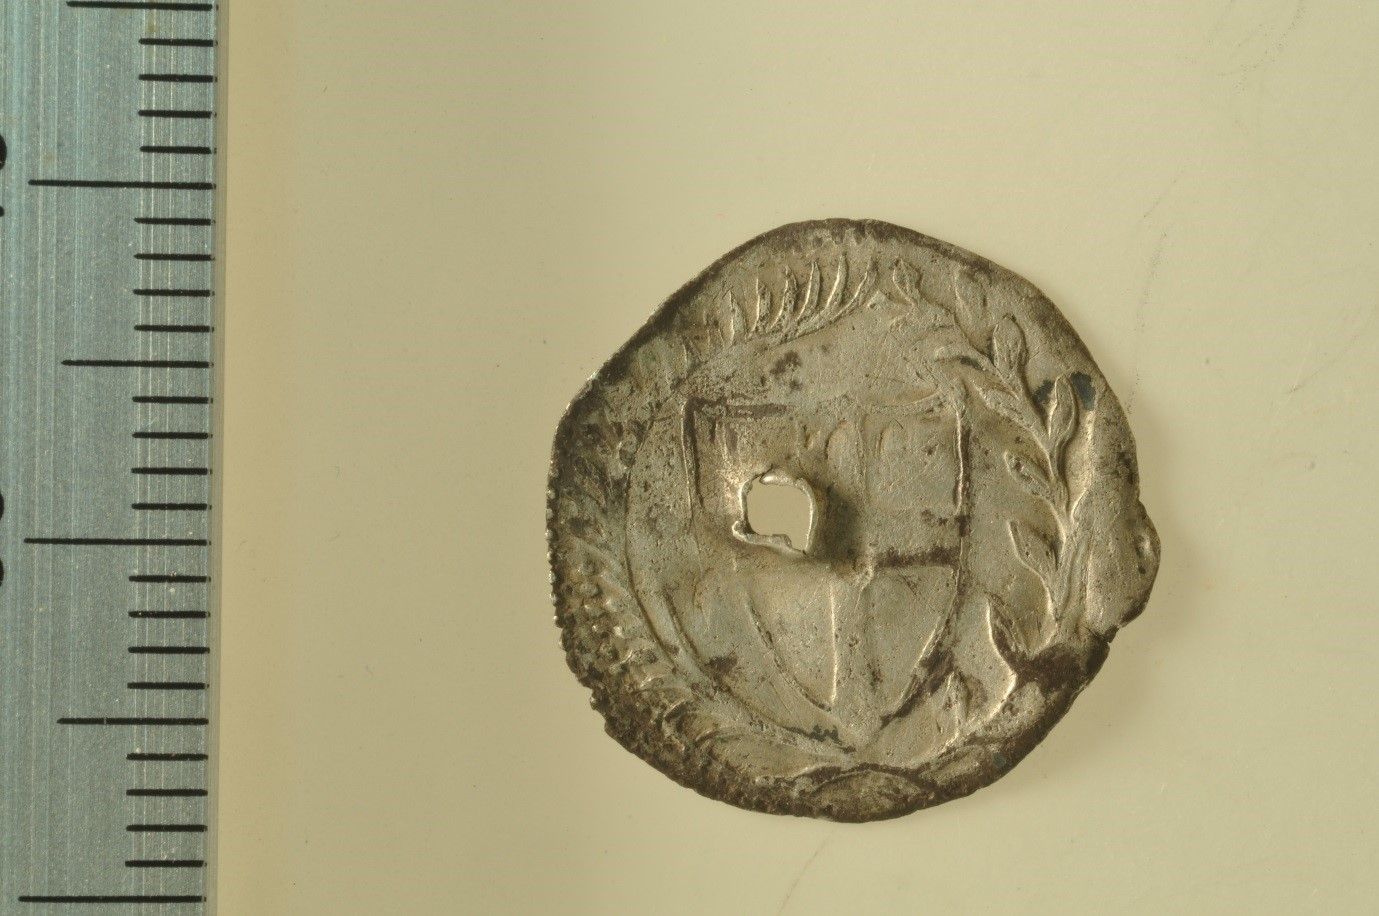 Commonwealth half groat found by Gwyn Rees near Wenvoe in 2015. The piercing may have been to take it out of circulation.